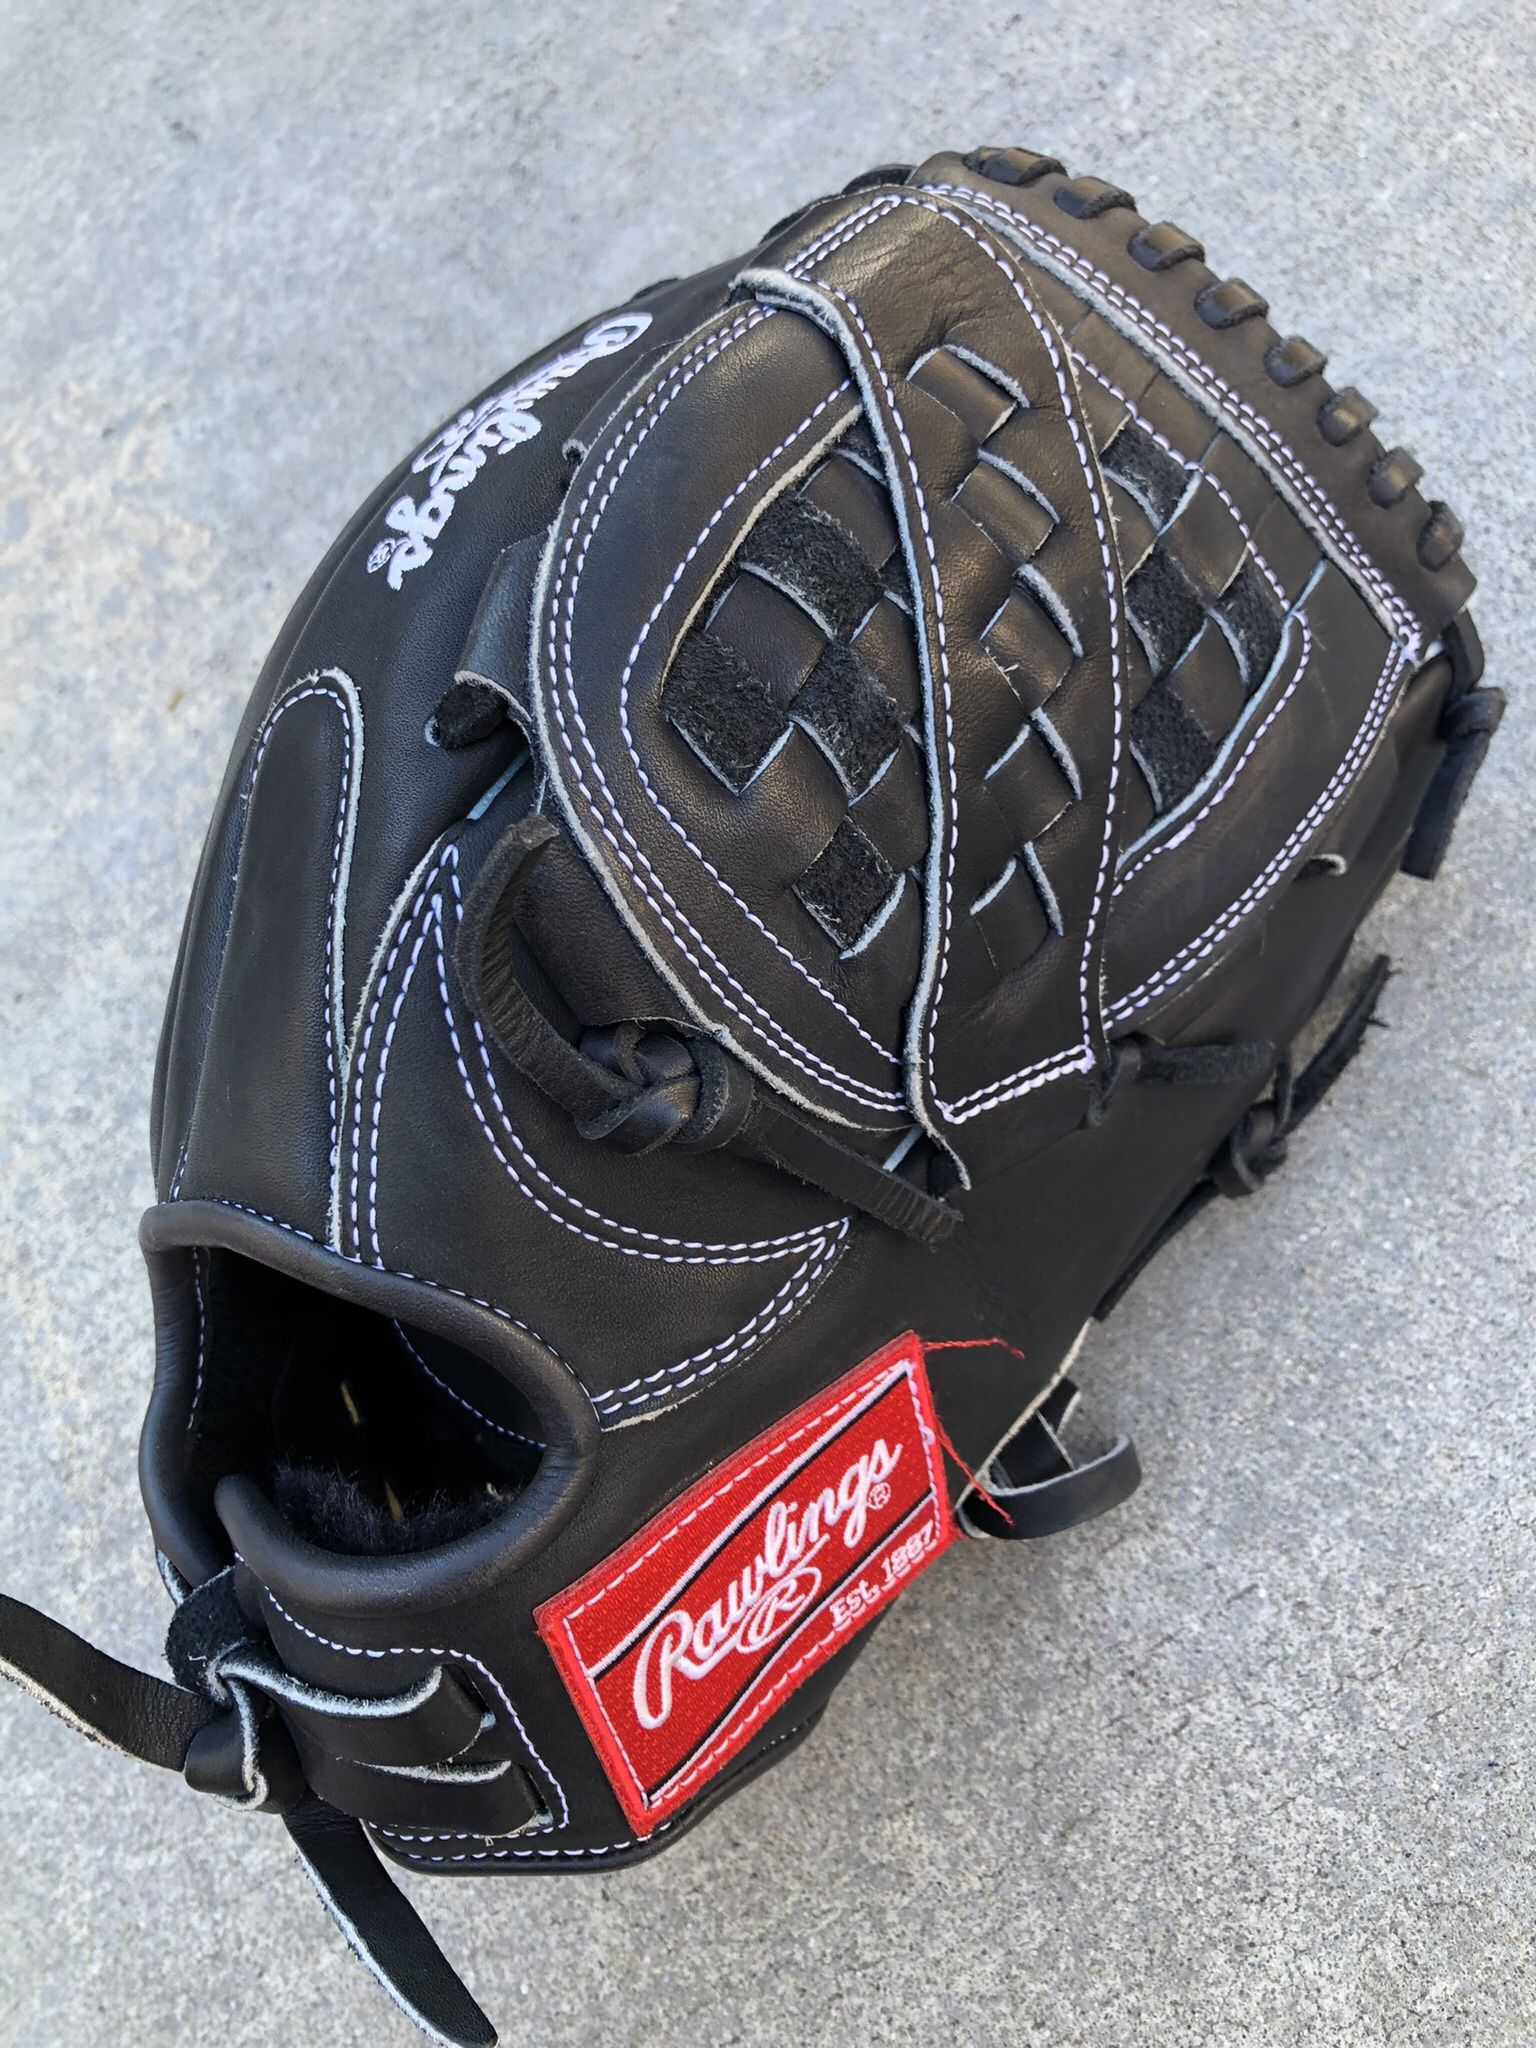 Rawlings Gold Glove Softball Glove Sz 12” In New Condition Have More Baseball And Softball Equipment Available. $100 Firm